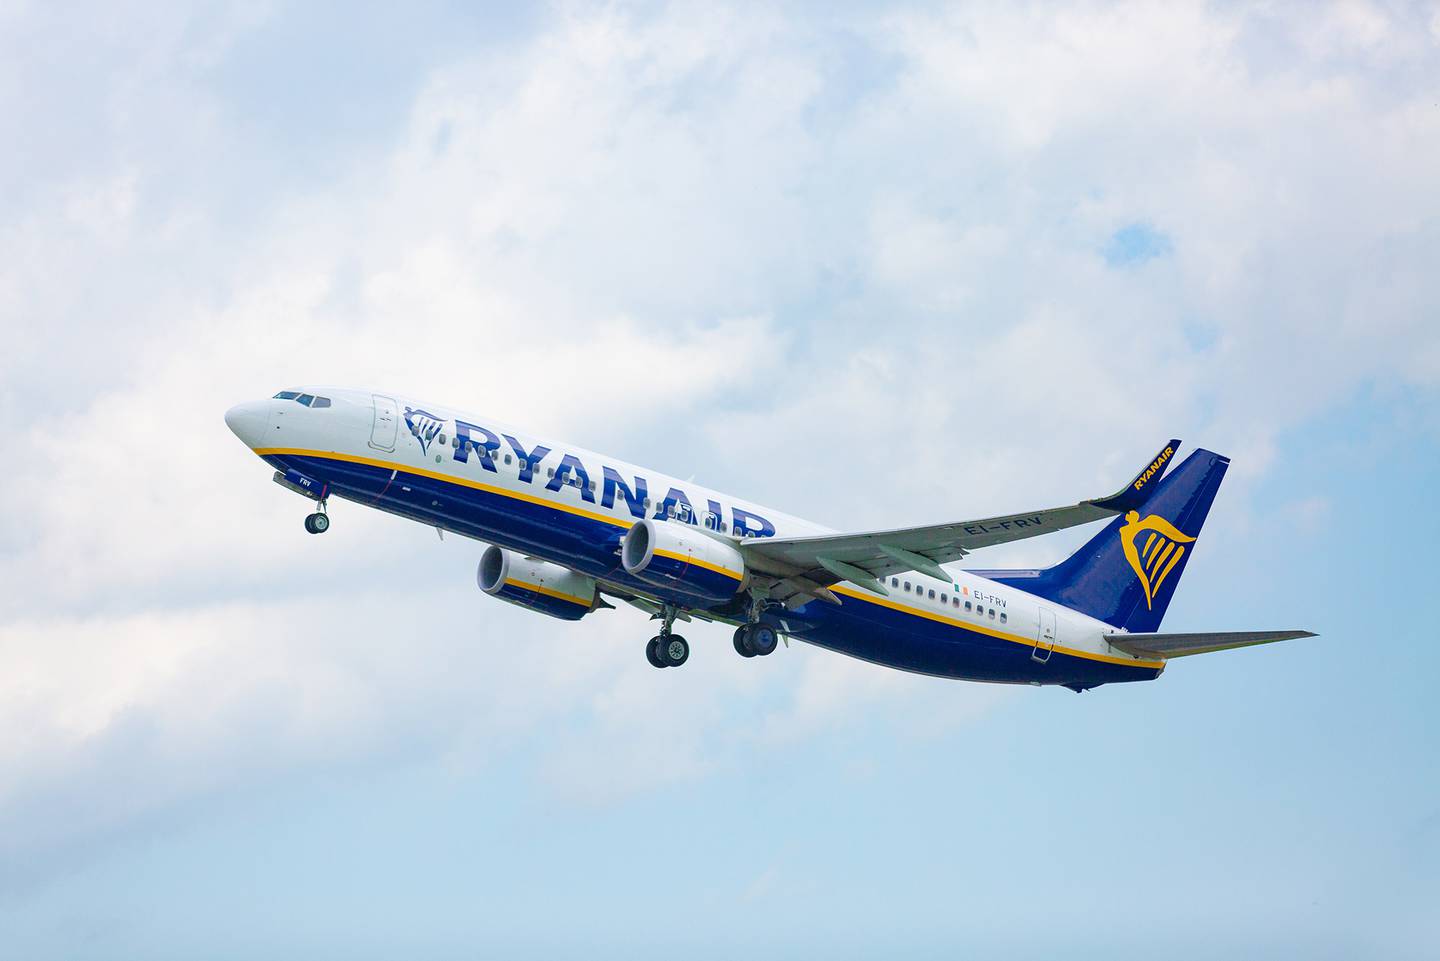 Ryanair ranked in the top 10 list of the world's best budget airlines in 2021. Ryanair